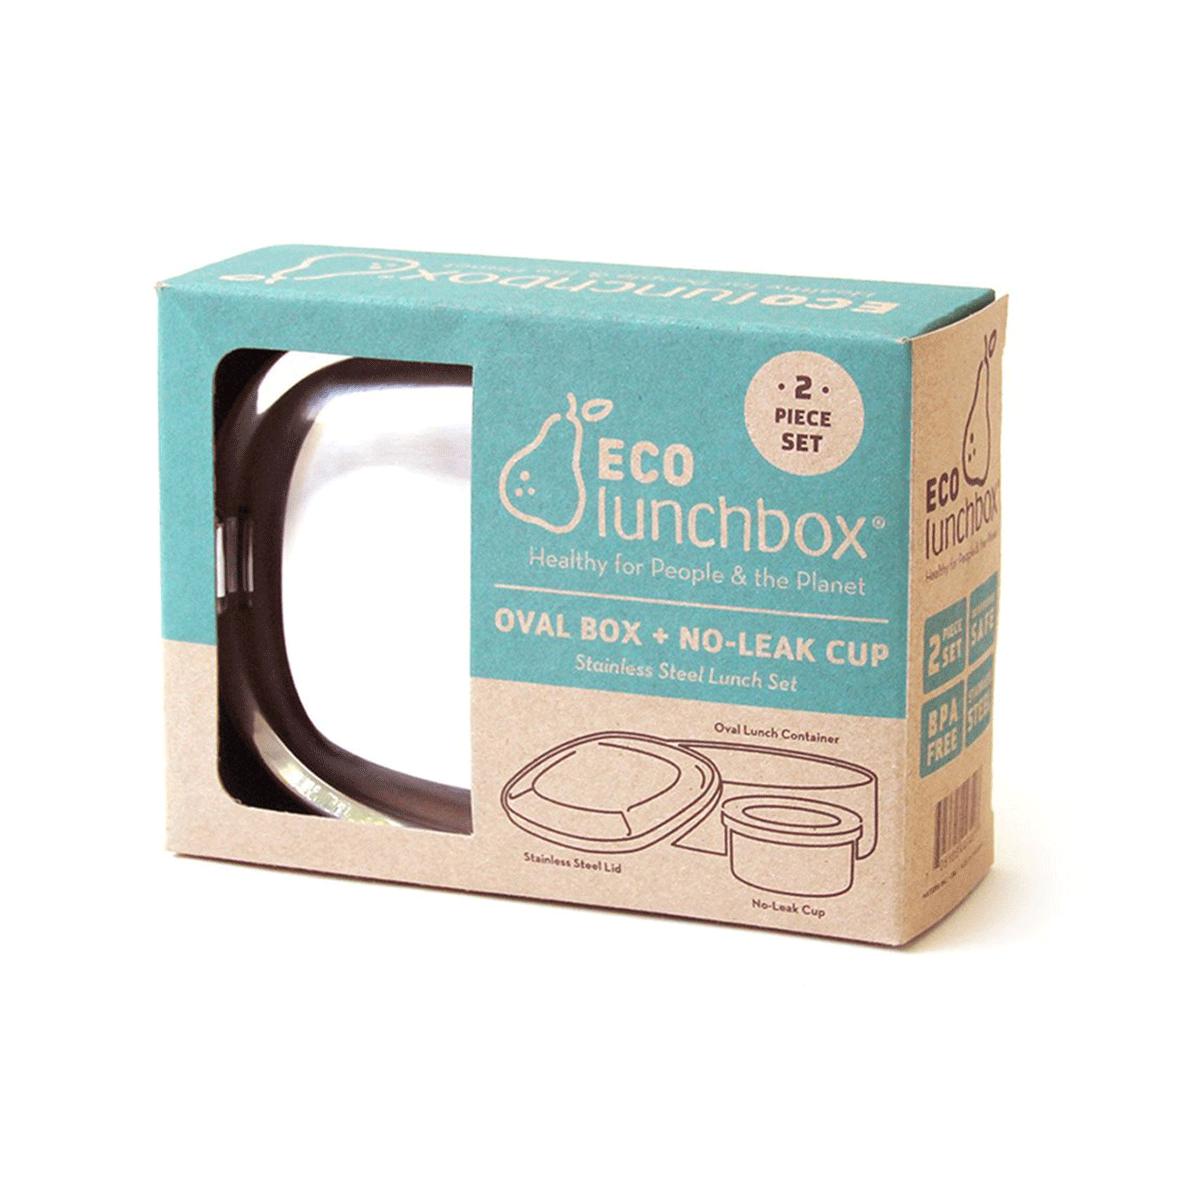 Ecolunchbox Oval met Snack Cup